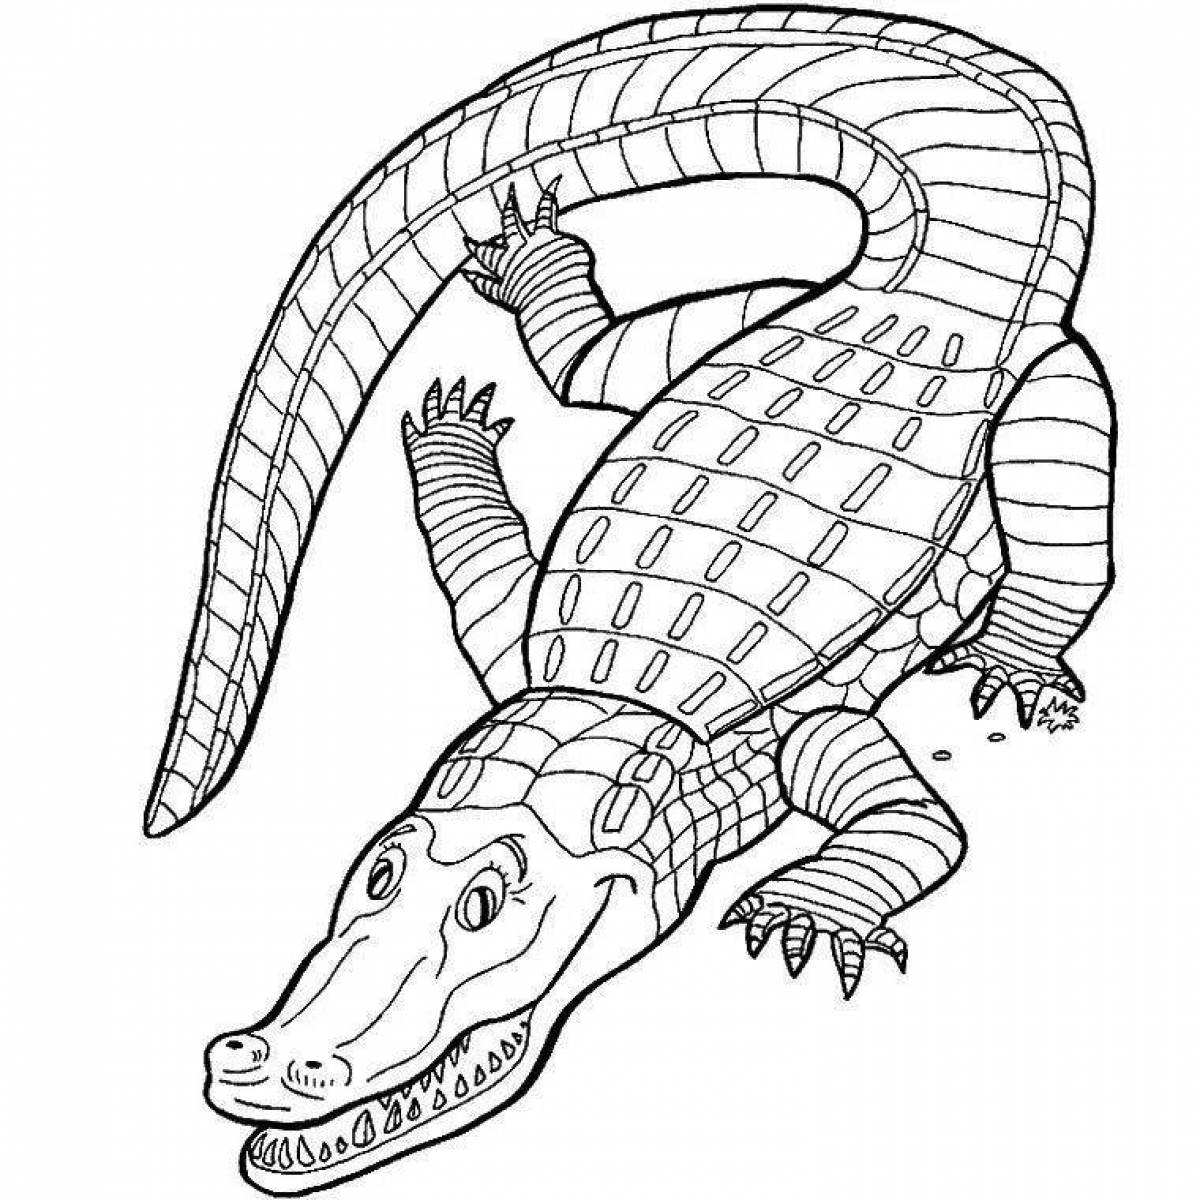 Amazing alligator coloring page